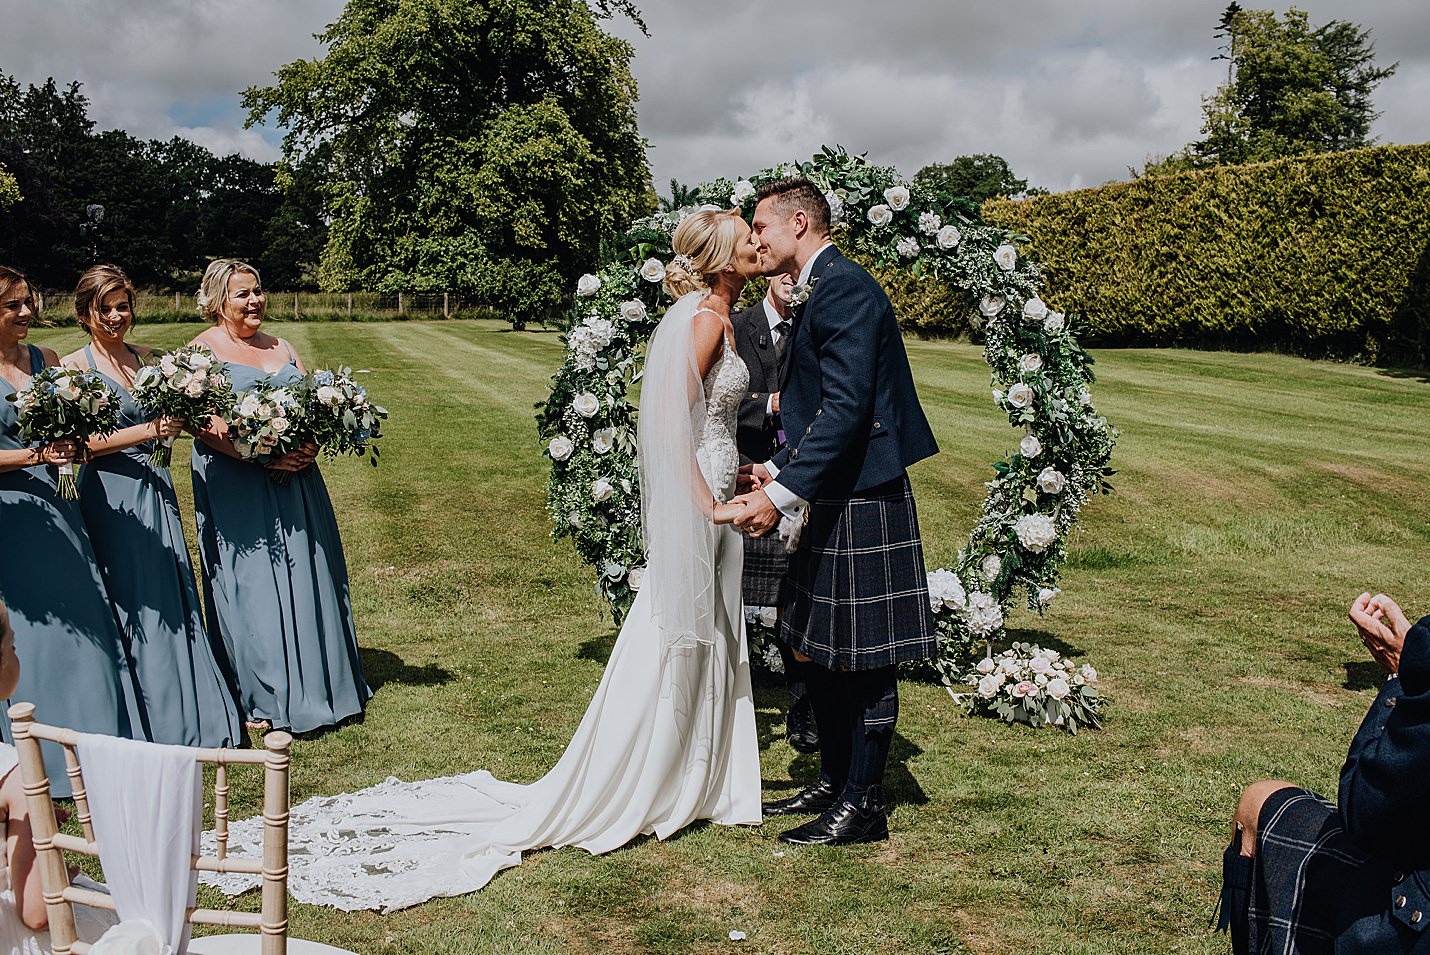 bride and groom first kiss at ceremony in front of floral arch on grass lawn sorn castle wedding